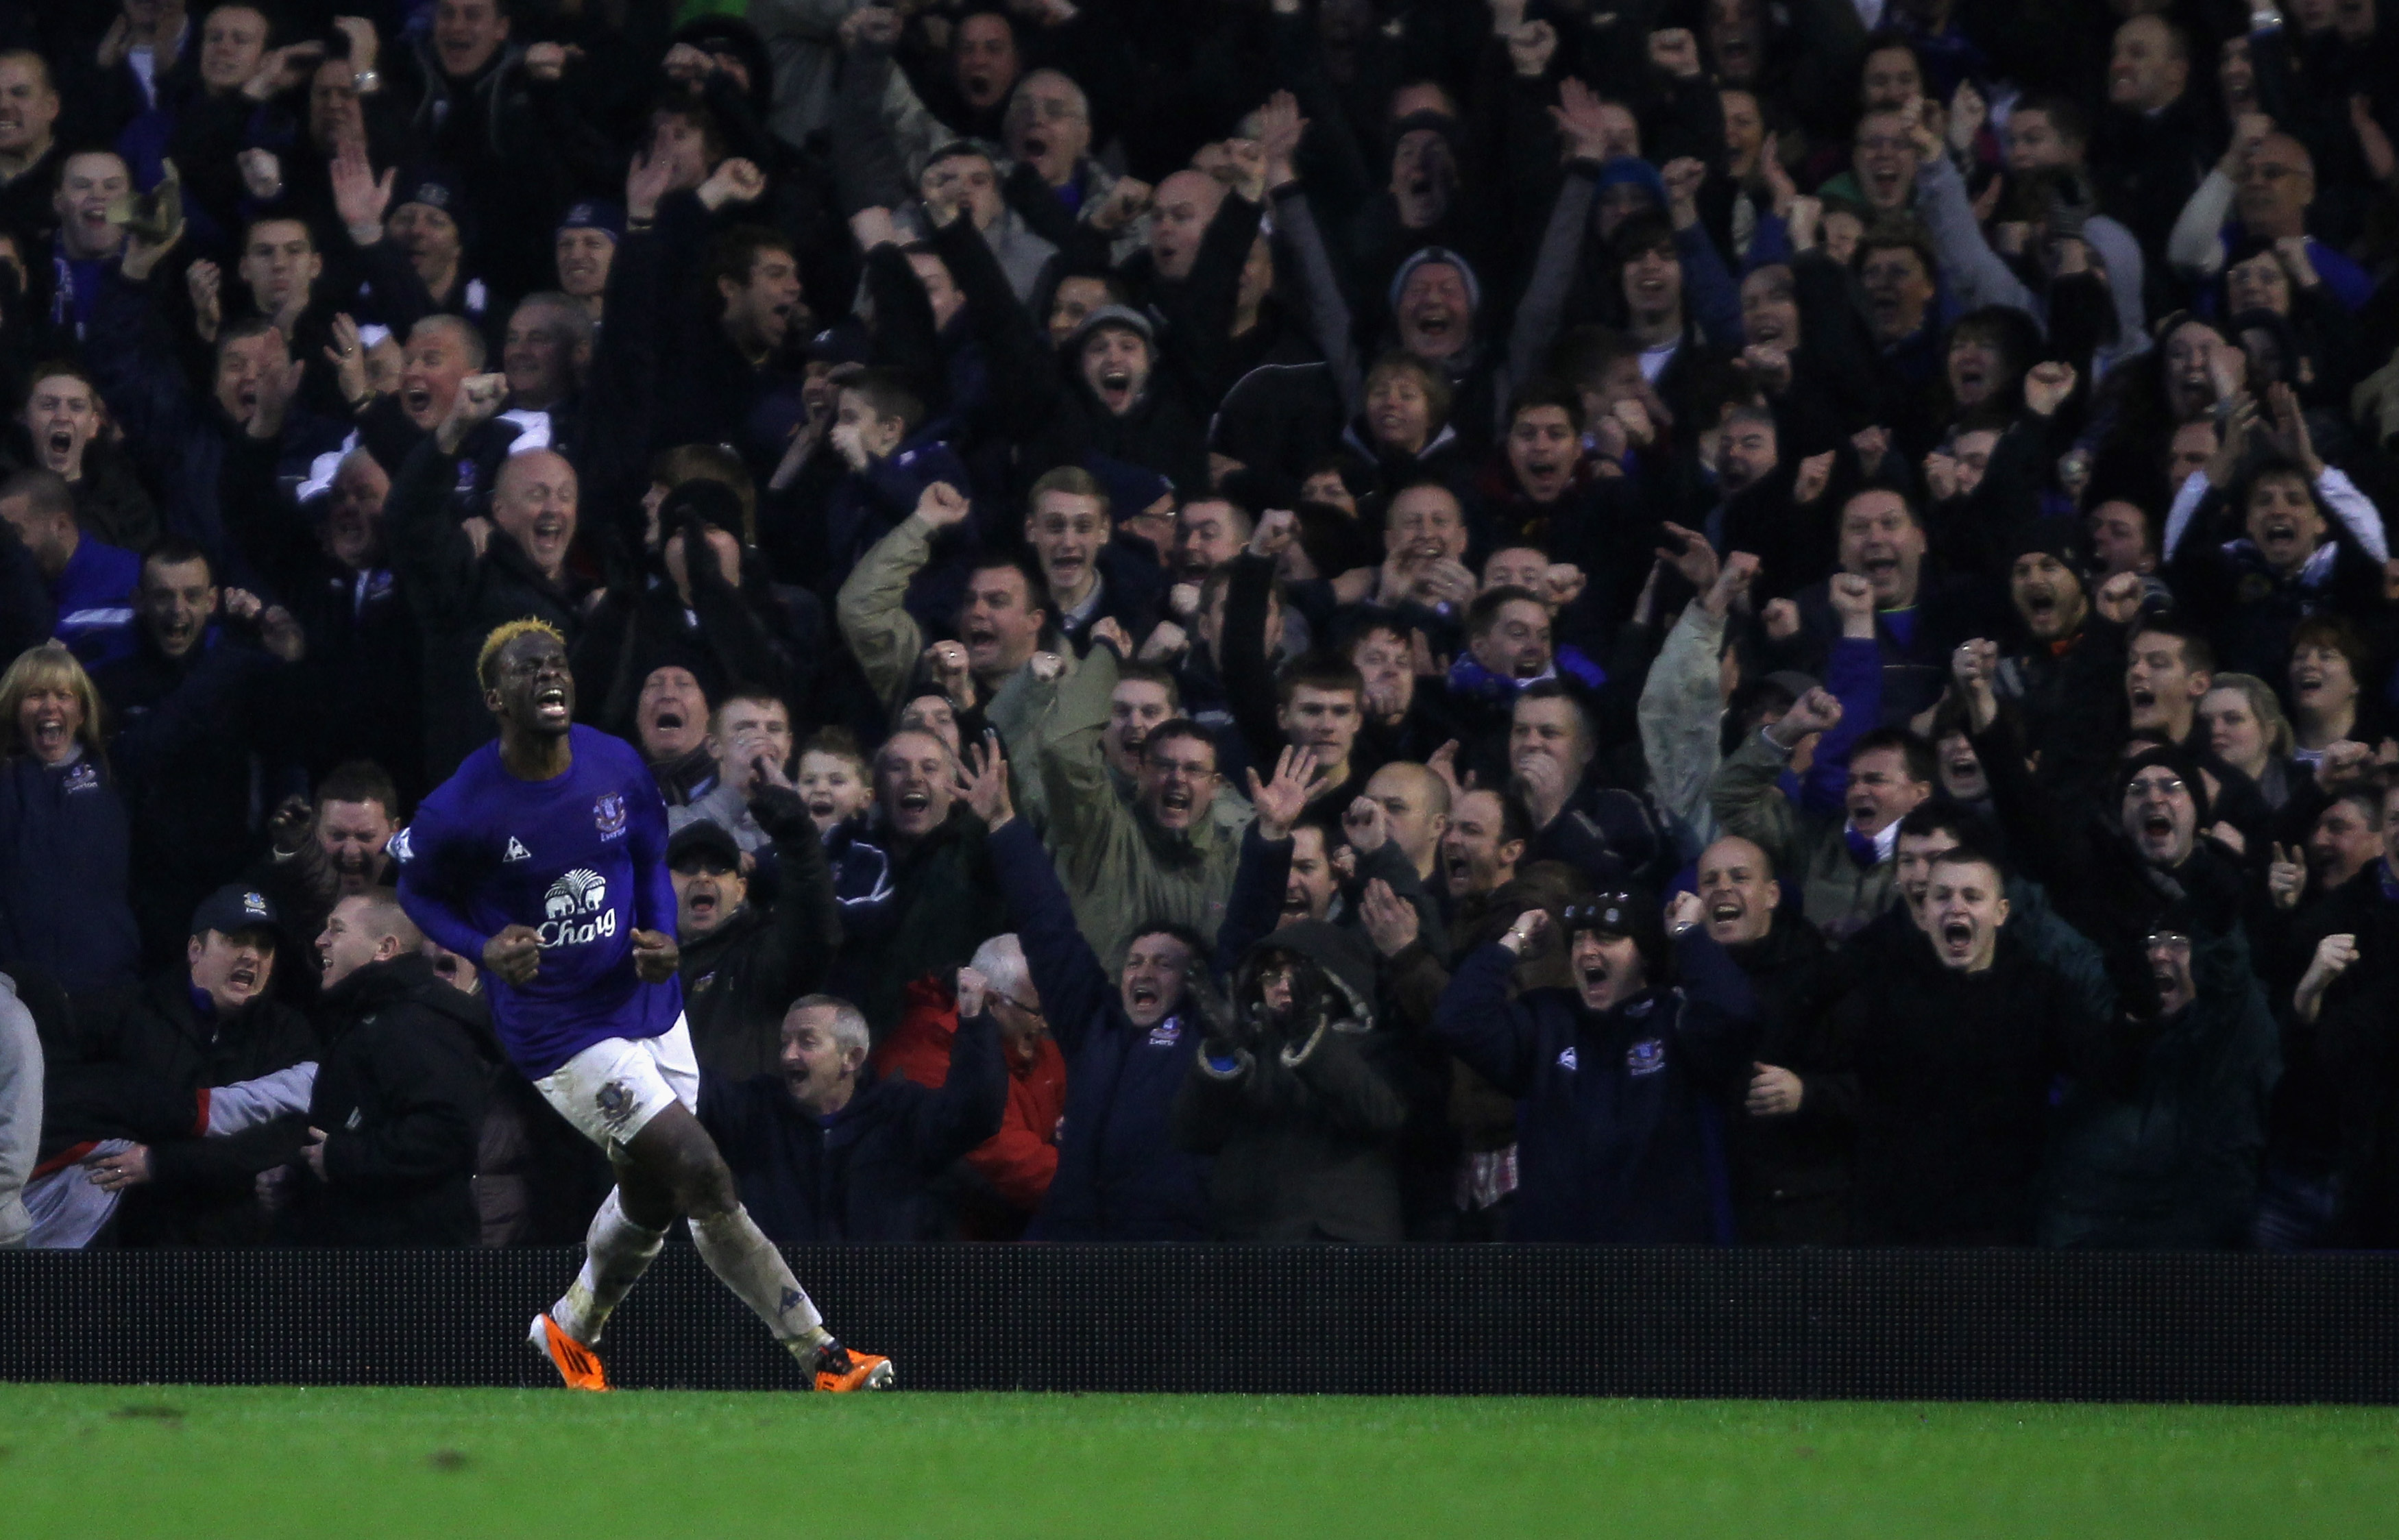 LIVERPOOL, ENGLAND - FEBRUARY 05:  Louis Saha of Everton runs away to celebrate after scoring his teams third goal and equalizer during the Barclays Premier League match between Everton and Blackpool at Goodison Park on February 5, 2011 in Liverpool, Engl